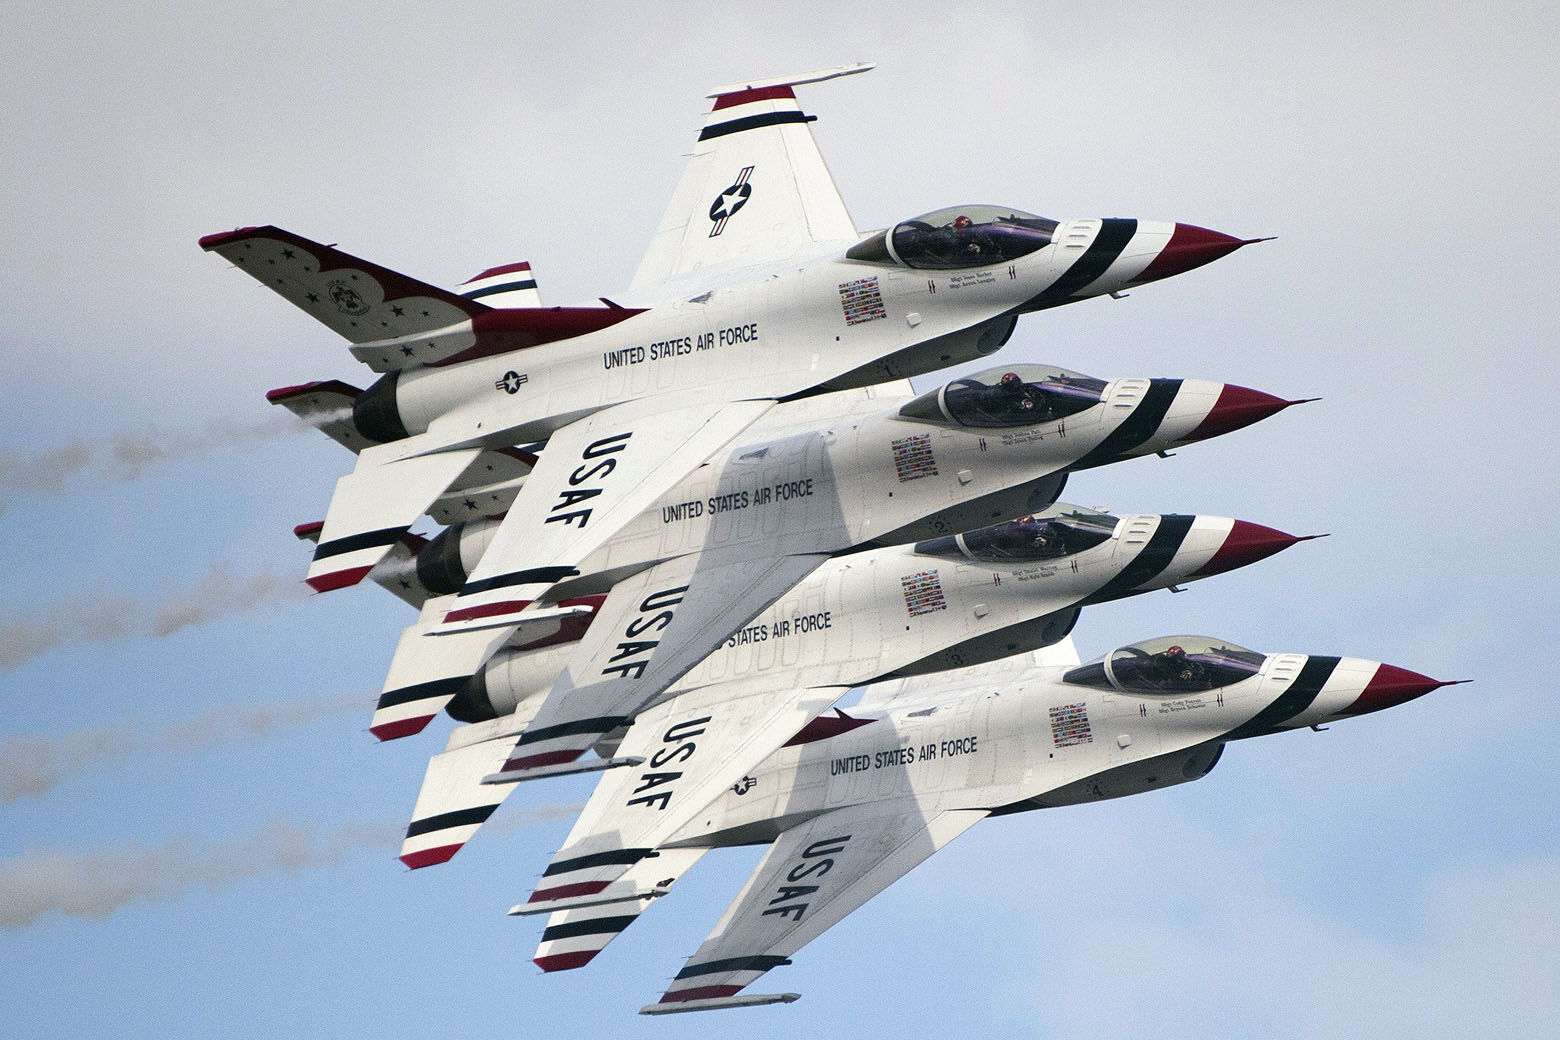 Big military air show returns this weekend to Joint Base Andrews in Md